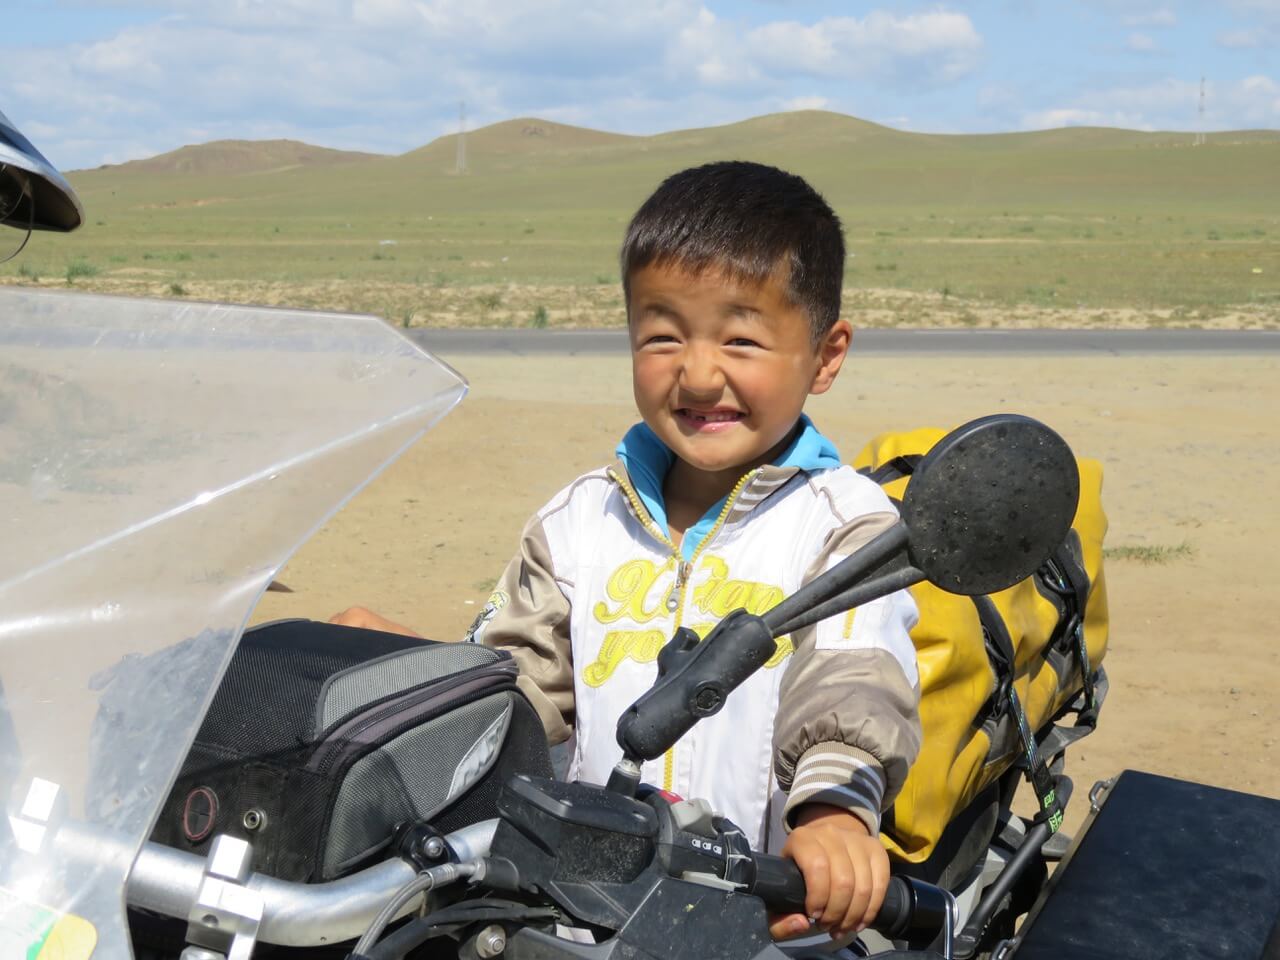 Epic Journey, Kids in Mongolia